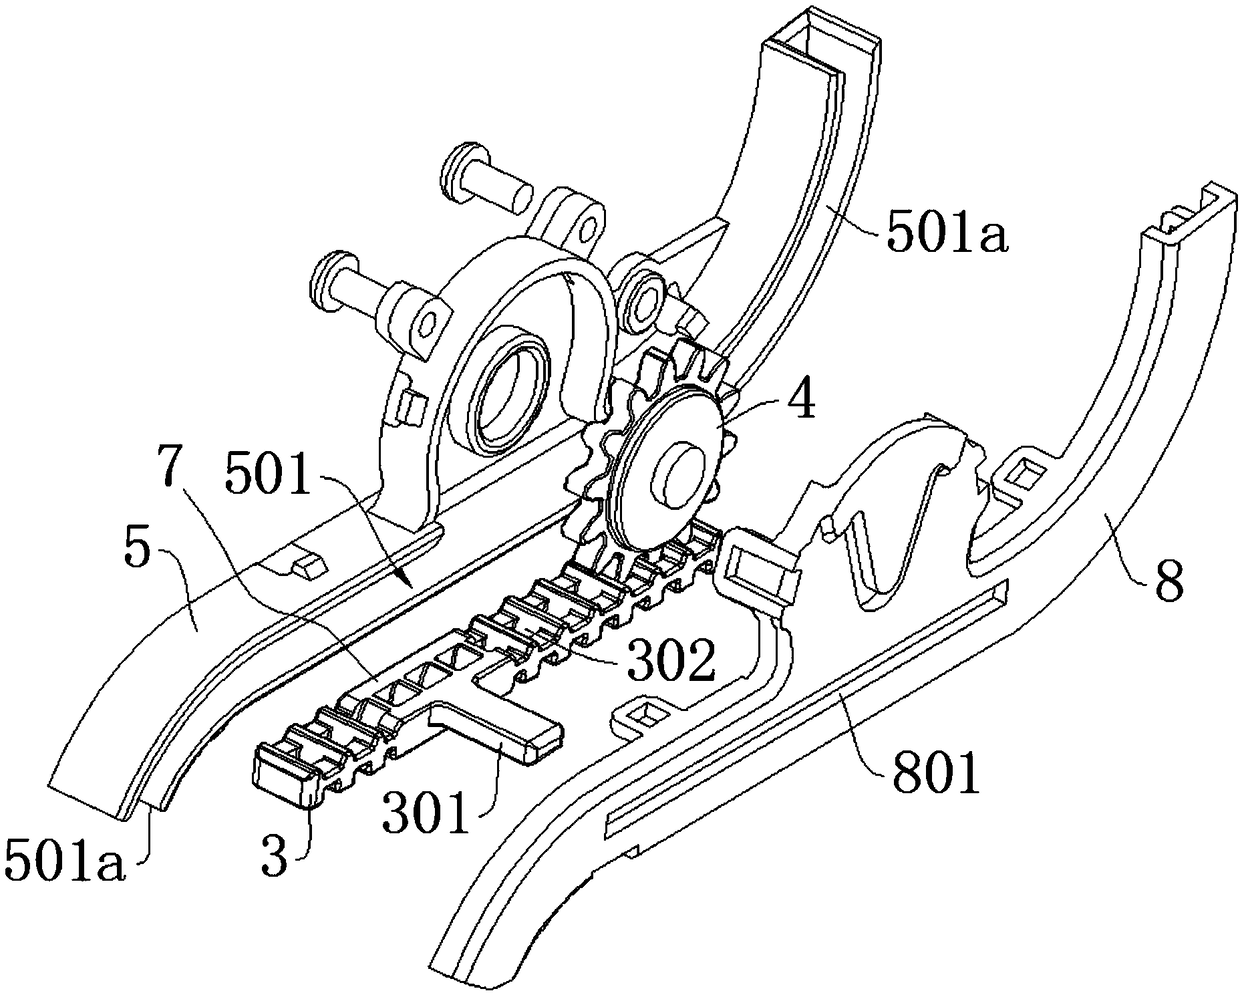 Gear-shifting driving device